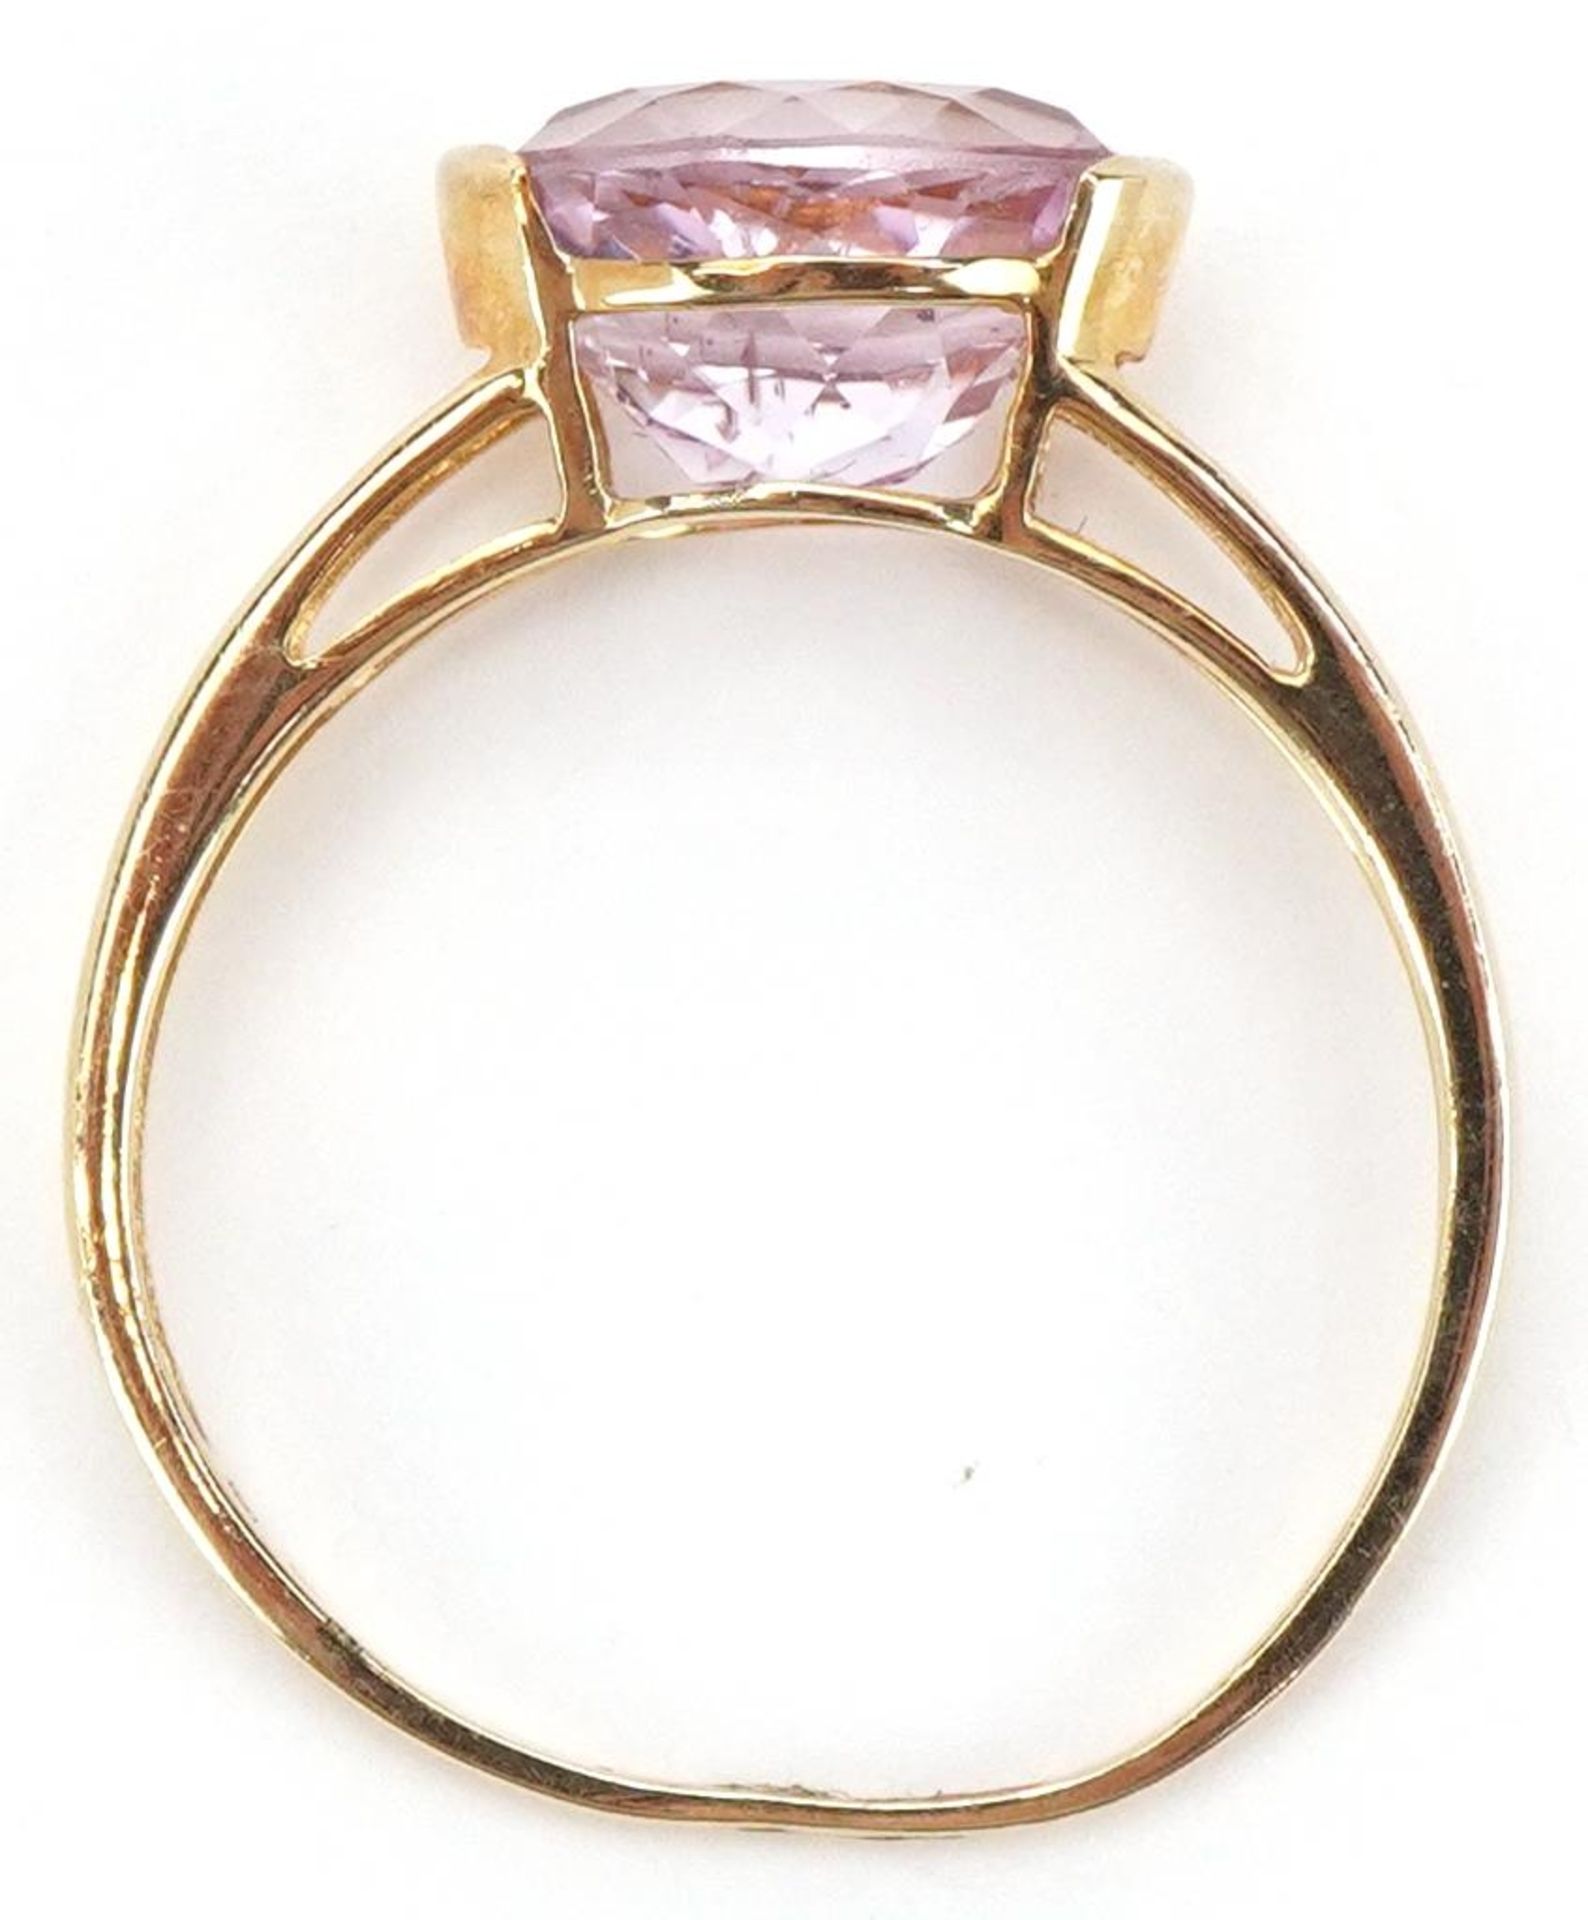 9ct gold amethyst solitaire ring, size R, 1.8g - Image 3 of 5